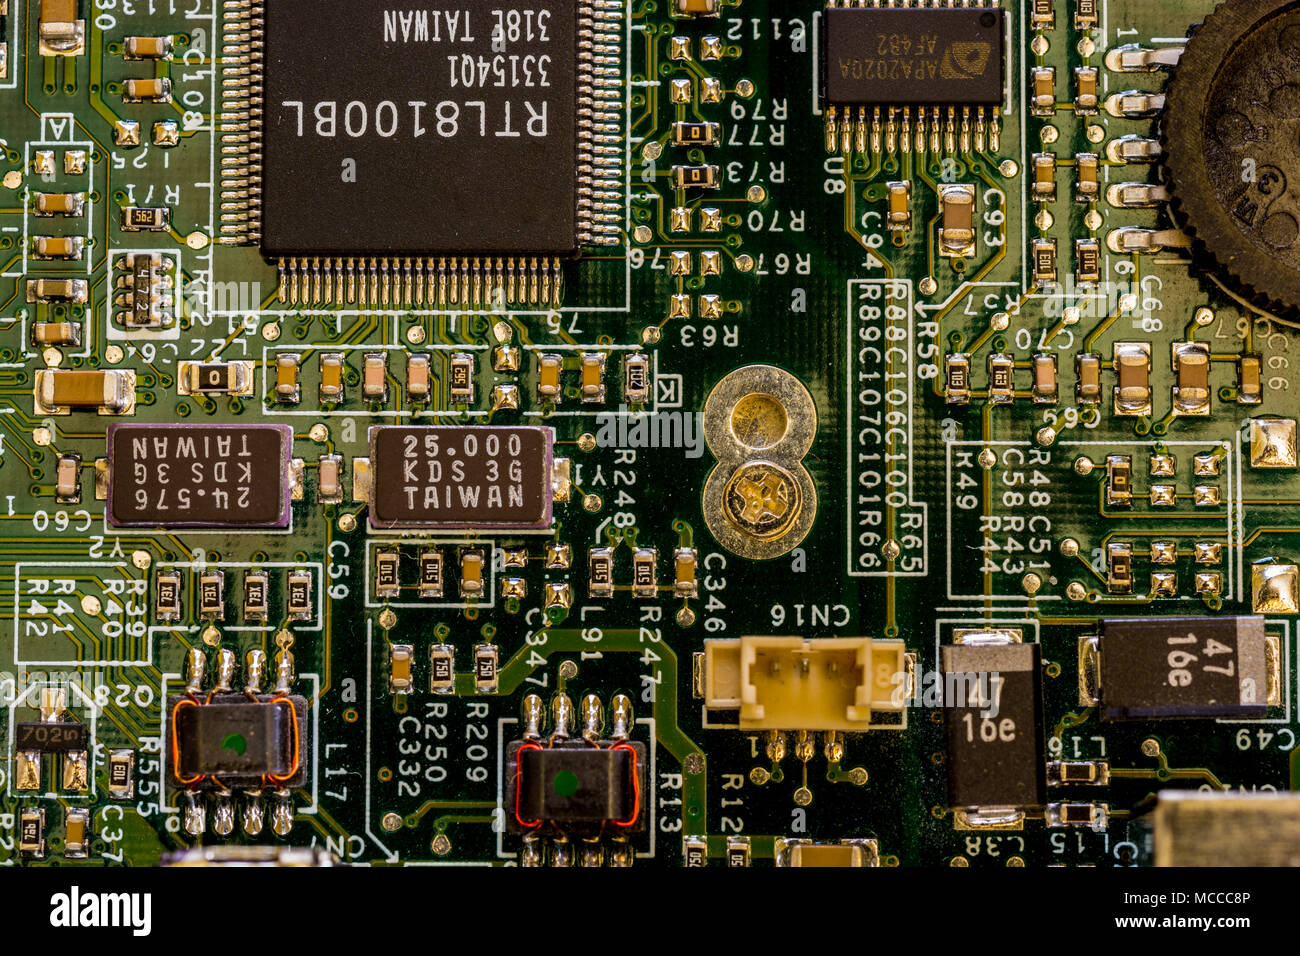 Close up view of motherboard showing main computer components and portals, microprocessors and intricate network of connections Stock Photo